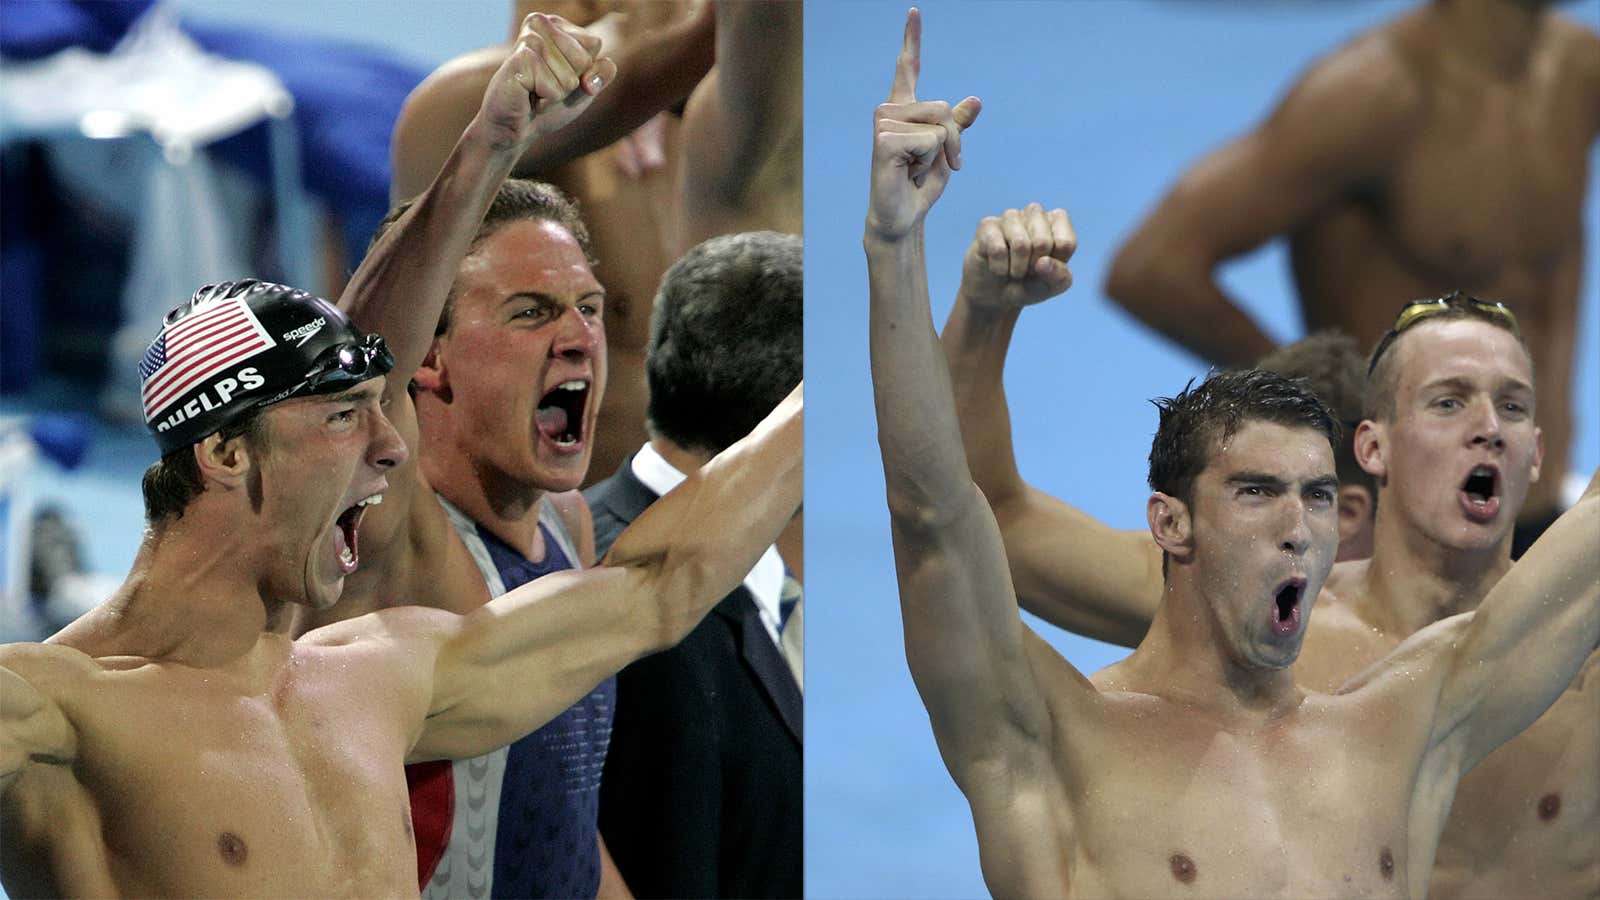 Cheering poolside in 2004 and 2016